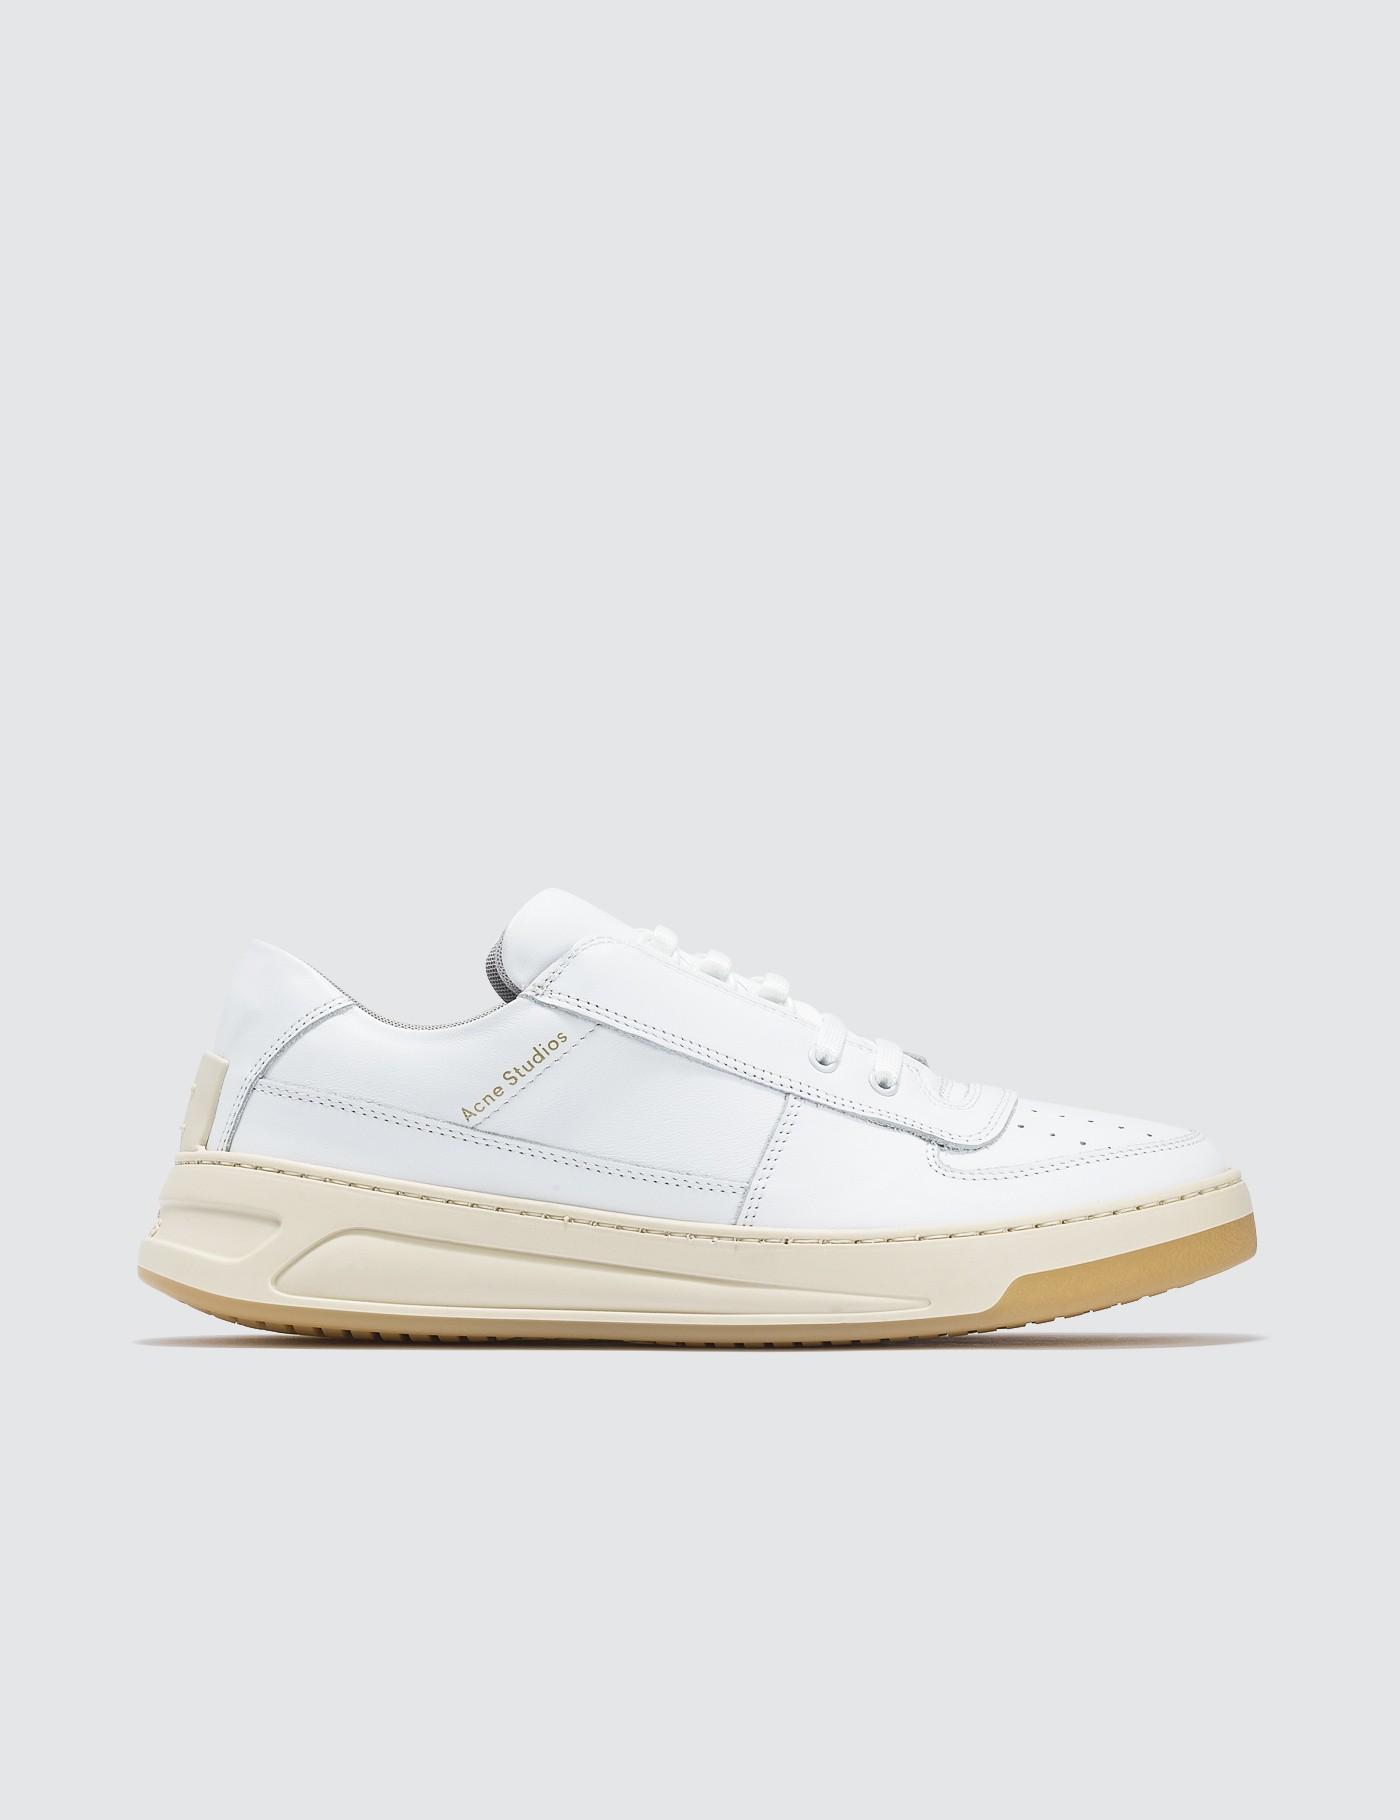 Acne Studios Perey Lace Up Sneakers in 